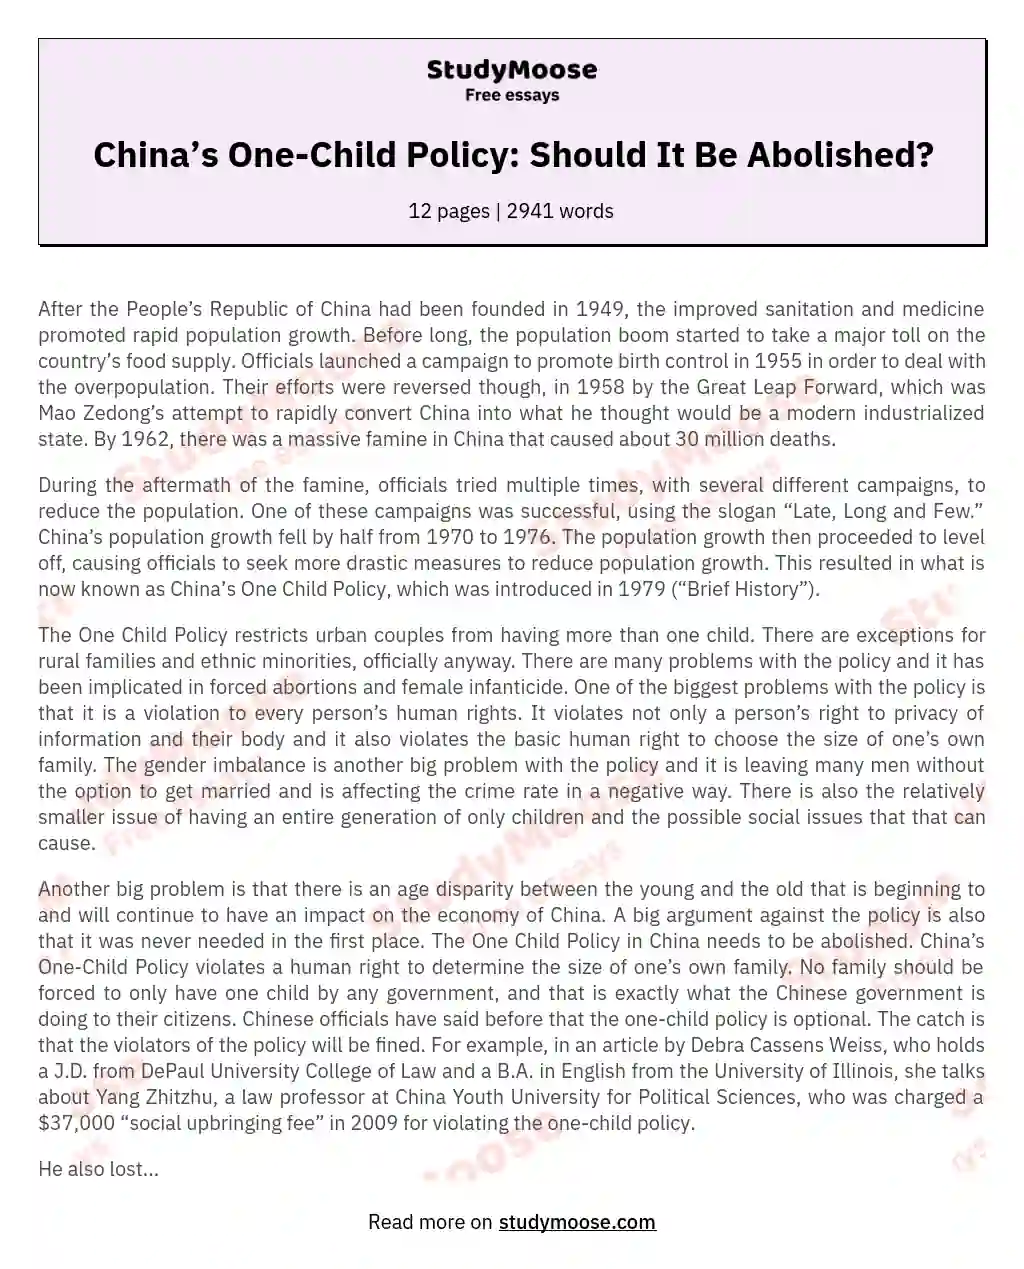 China's One Child Policy: Violating Human Rights and Creating Social Issues essay